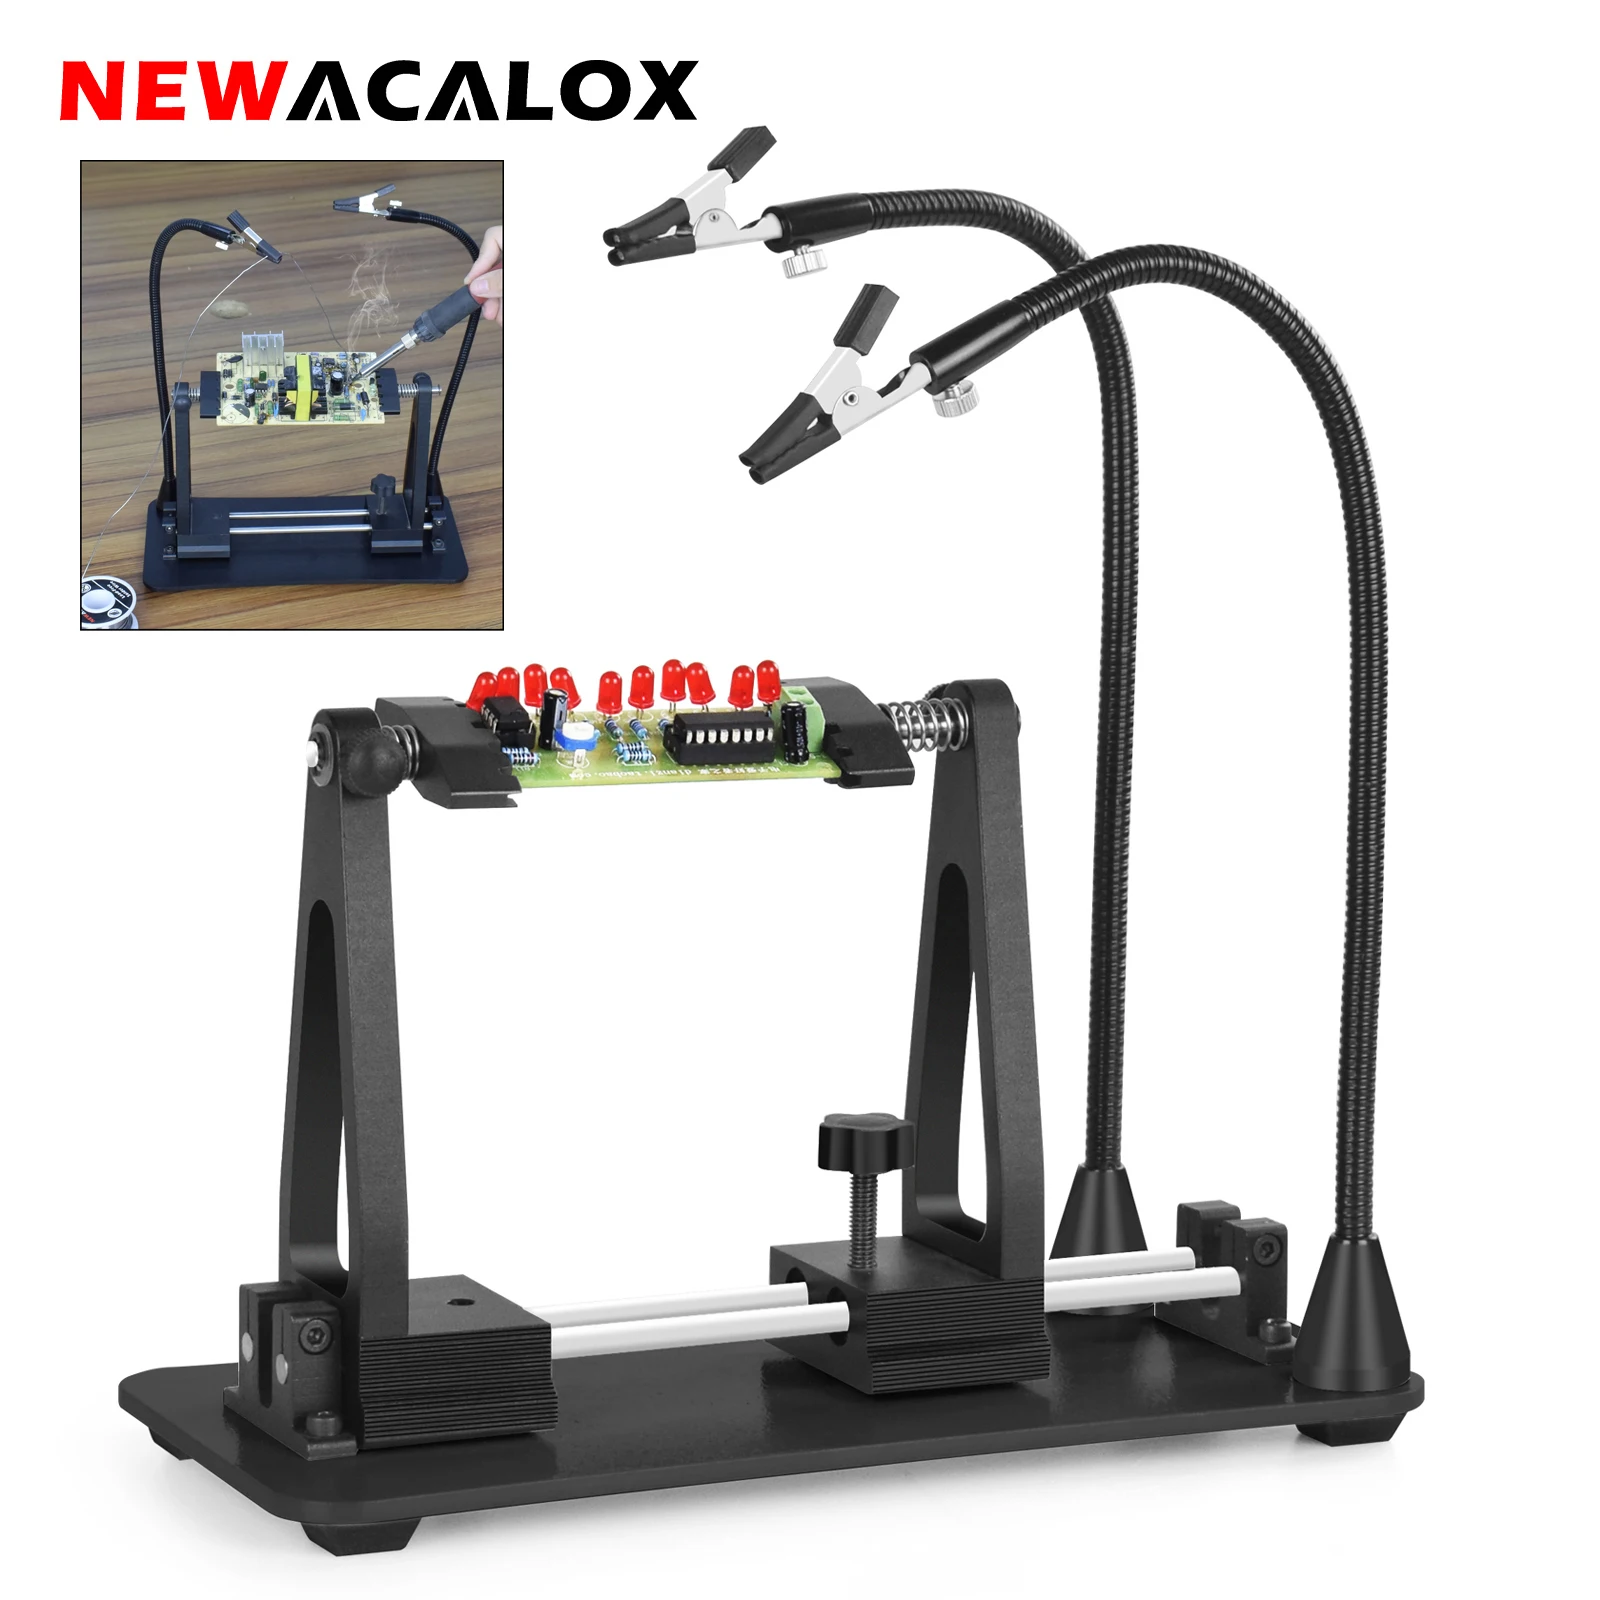 NEWACALOX 360° Adjustable PCB Holder with 2Pcs Magnetic Flexible Soldering Third Hand Welding Repair Helping Hands Station